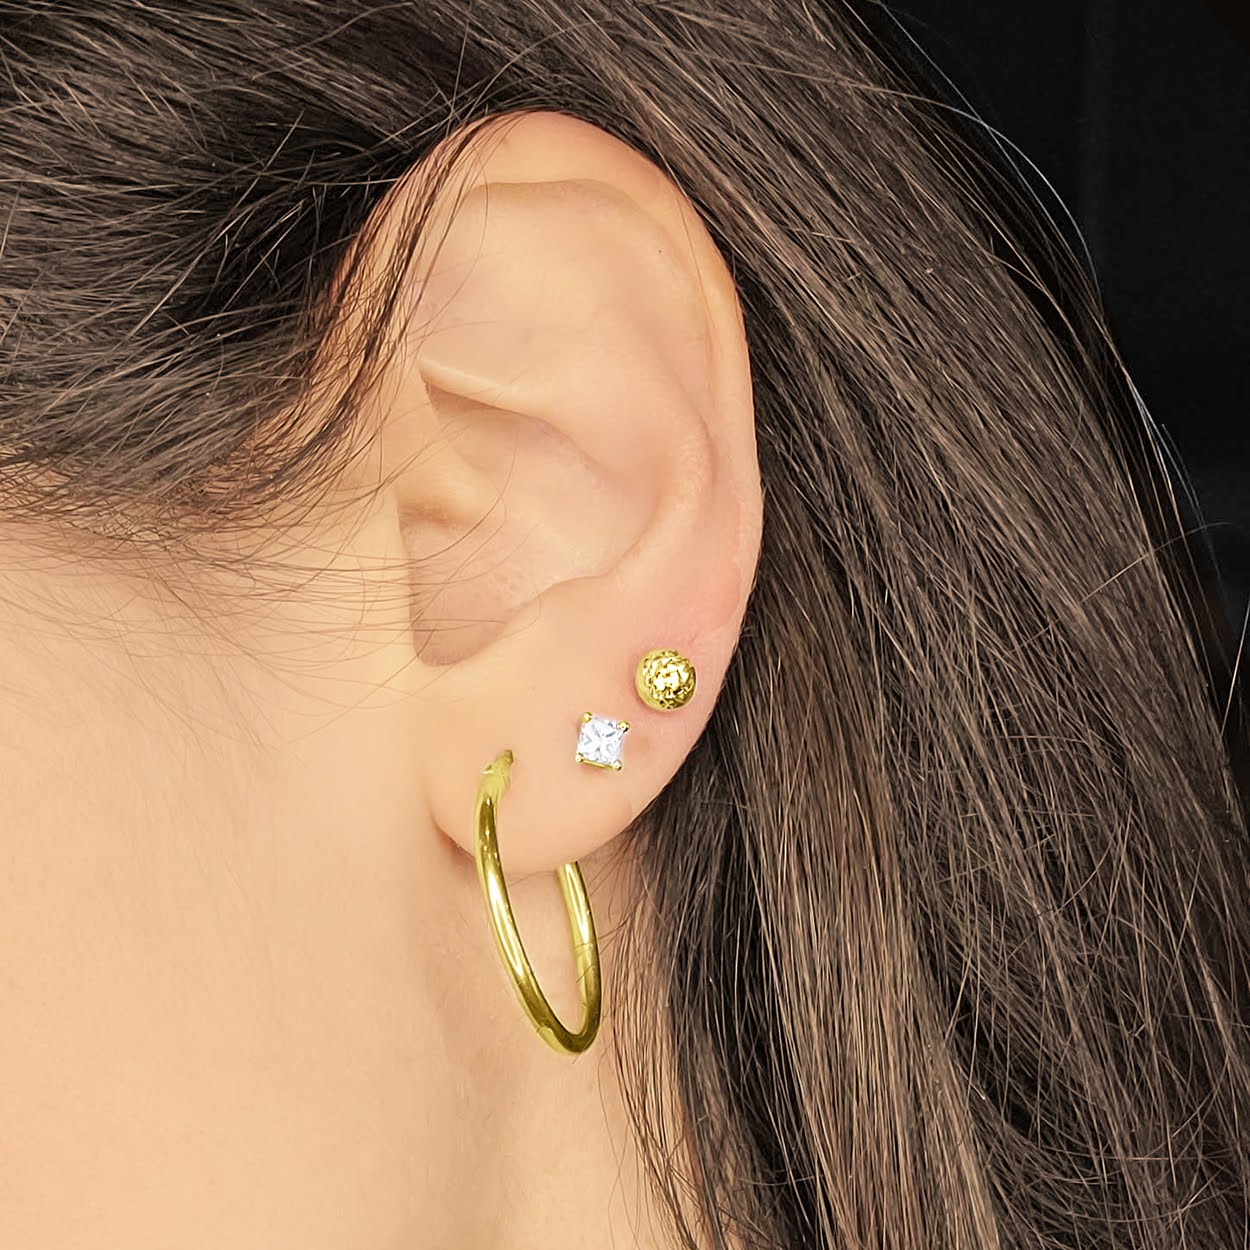 Woman wearing 5mm Cosmo 10KT Yellow Gold Studs